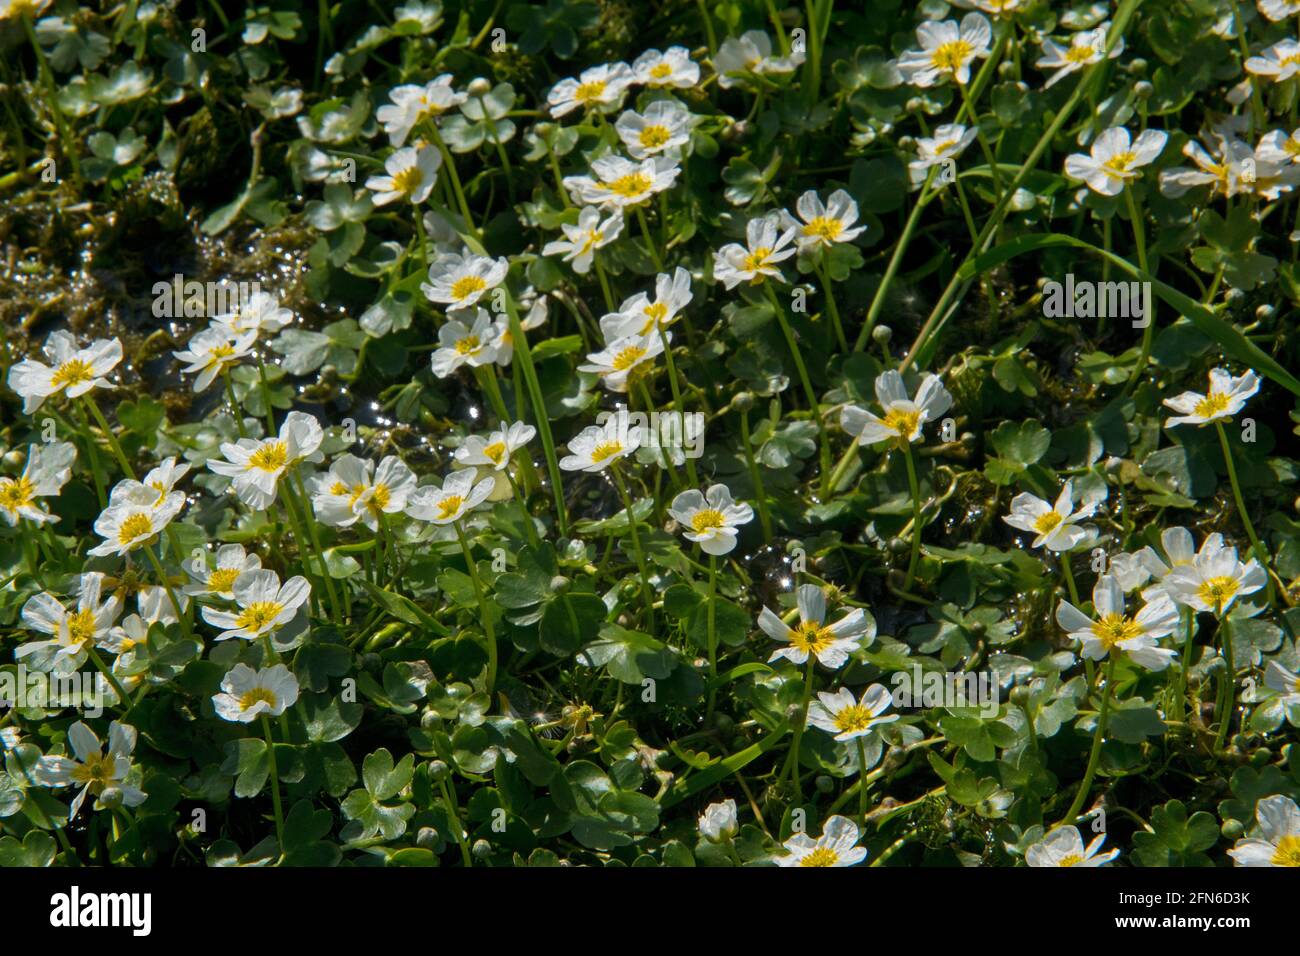 Lots of white petaled flowers with yellow centres of Common water-crowfoot in water Stock Photo